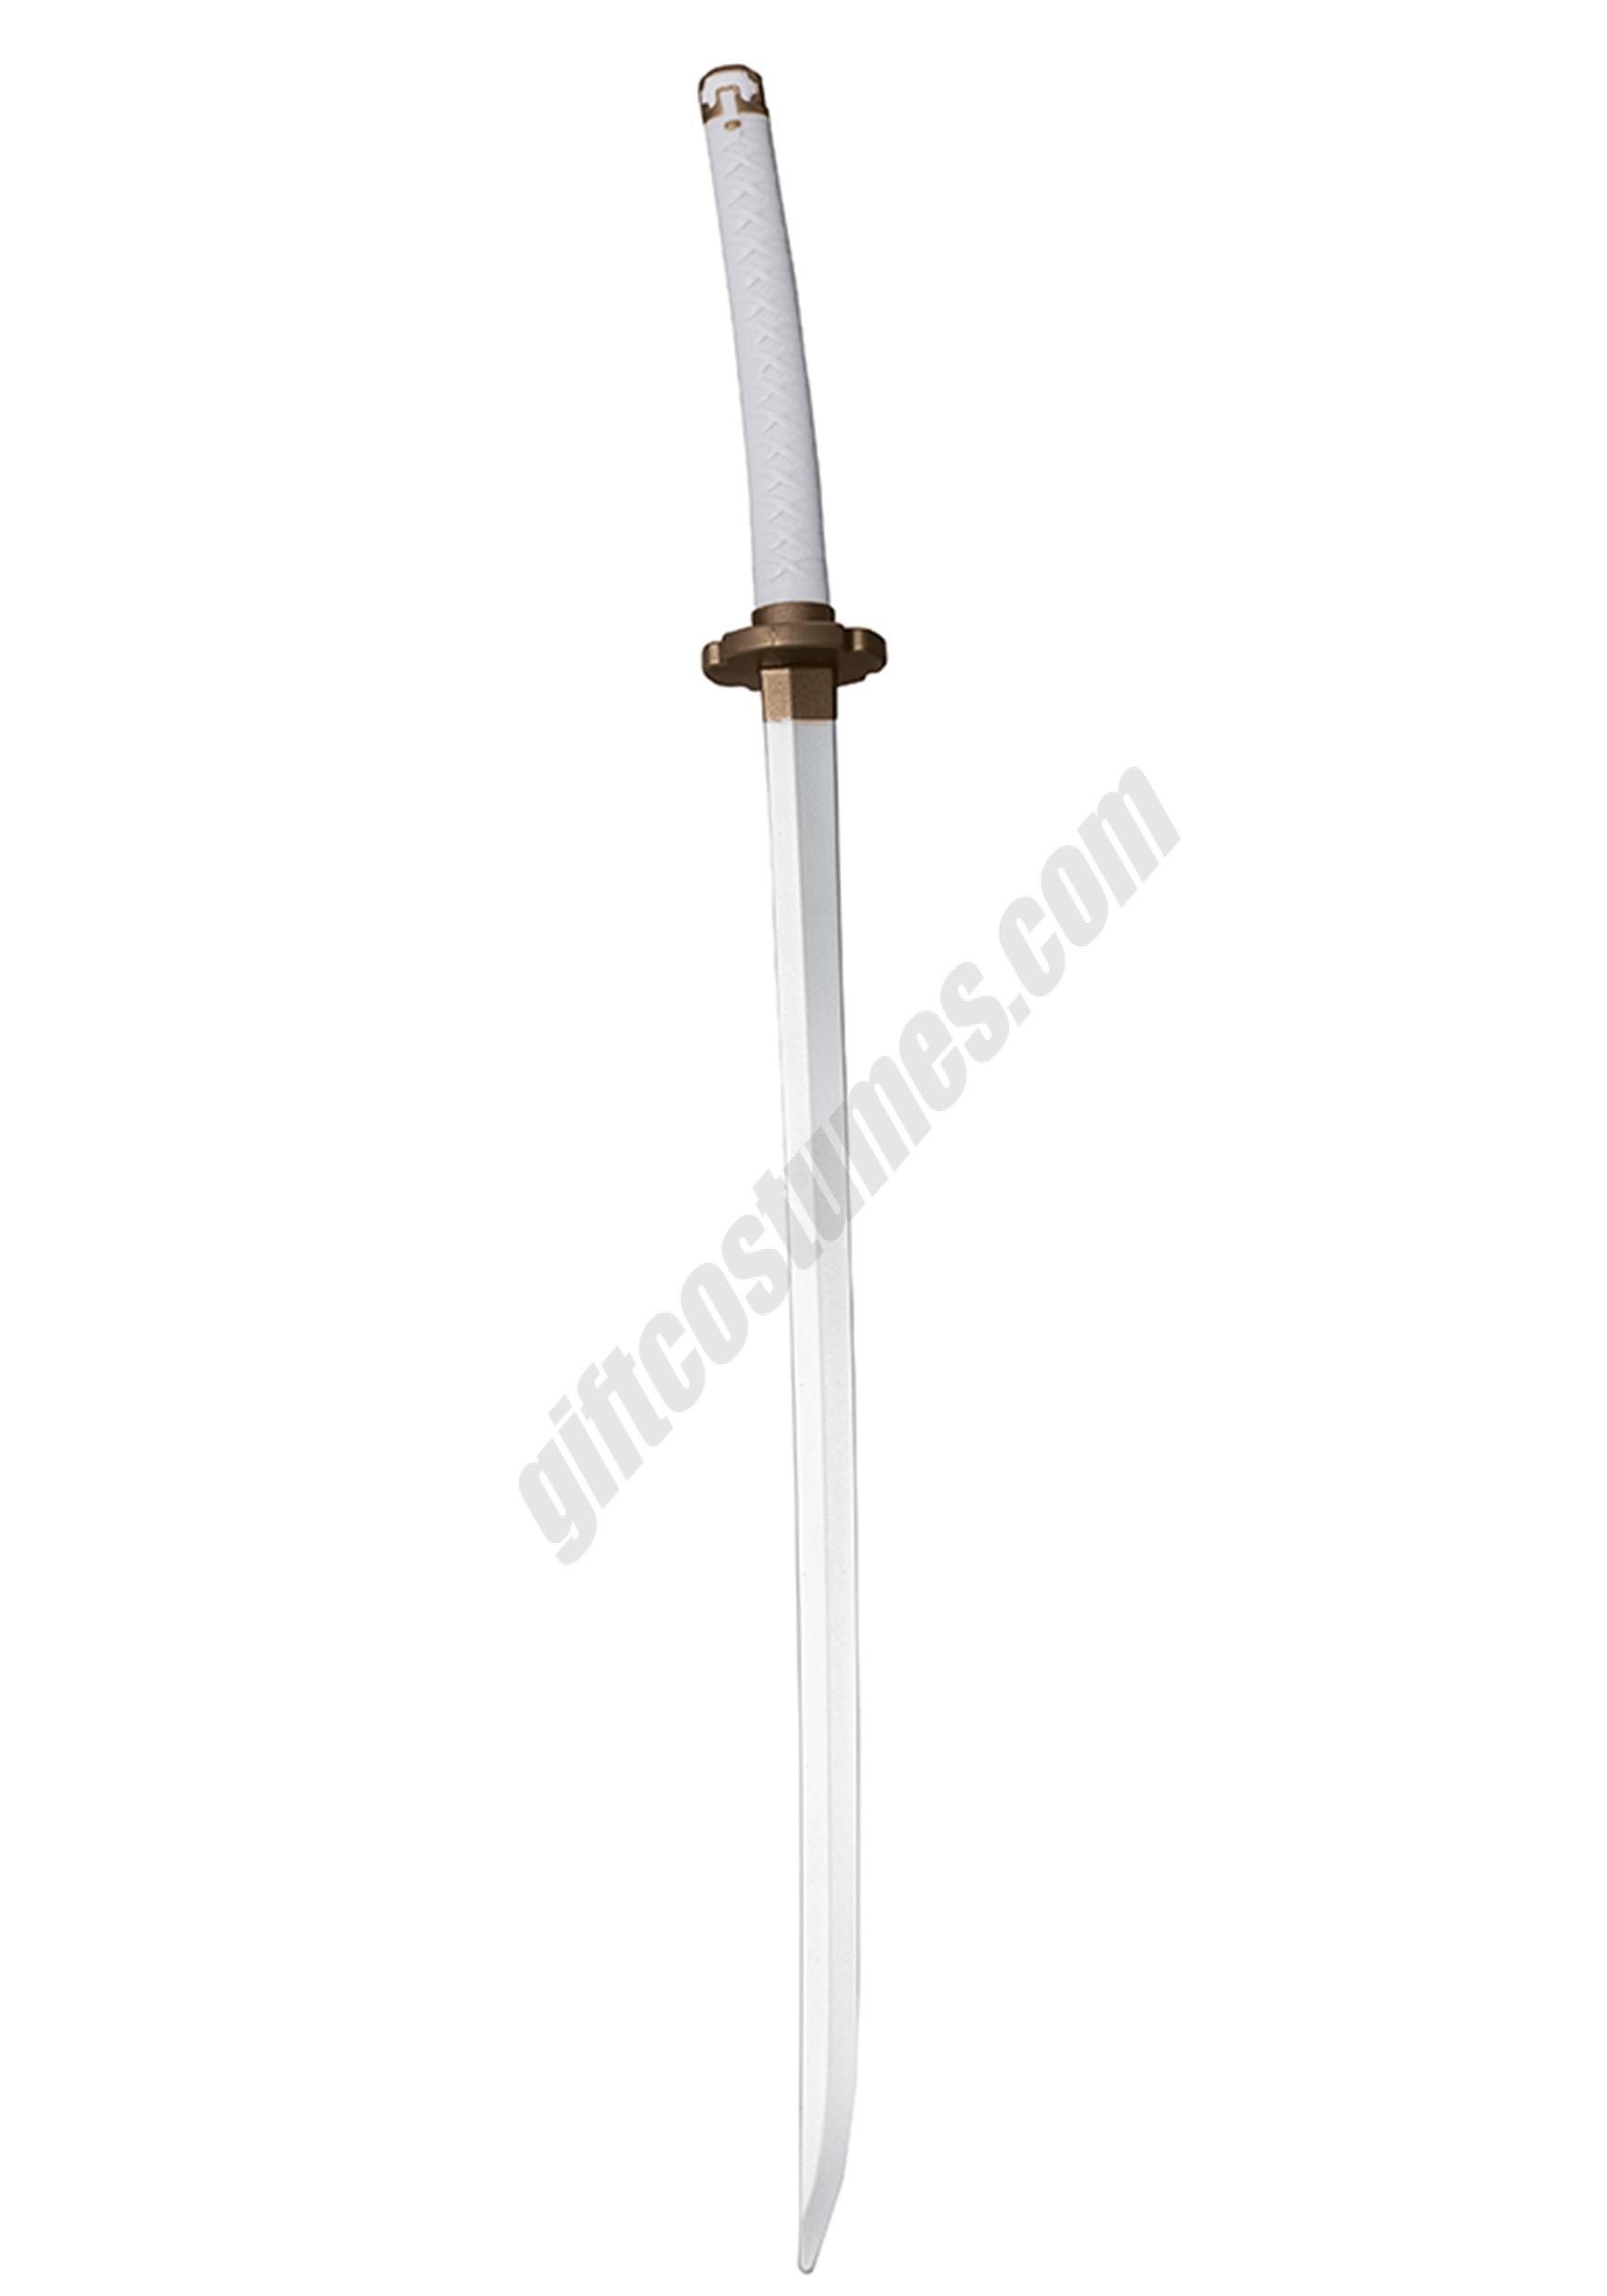 Snake Eyes Movie Storm Shadow Sword Promotions - Snake Eyes Movie Storm Shadow Sword Promotions